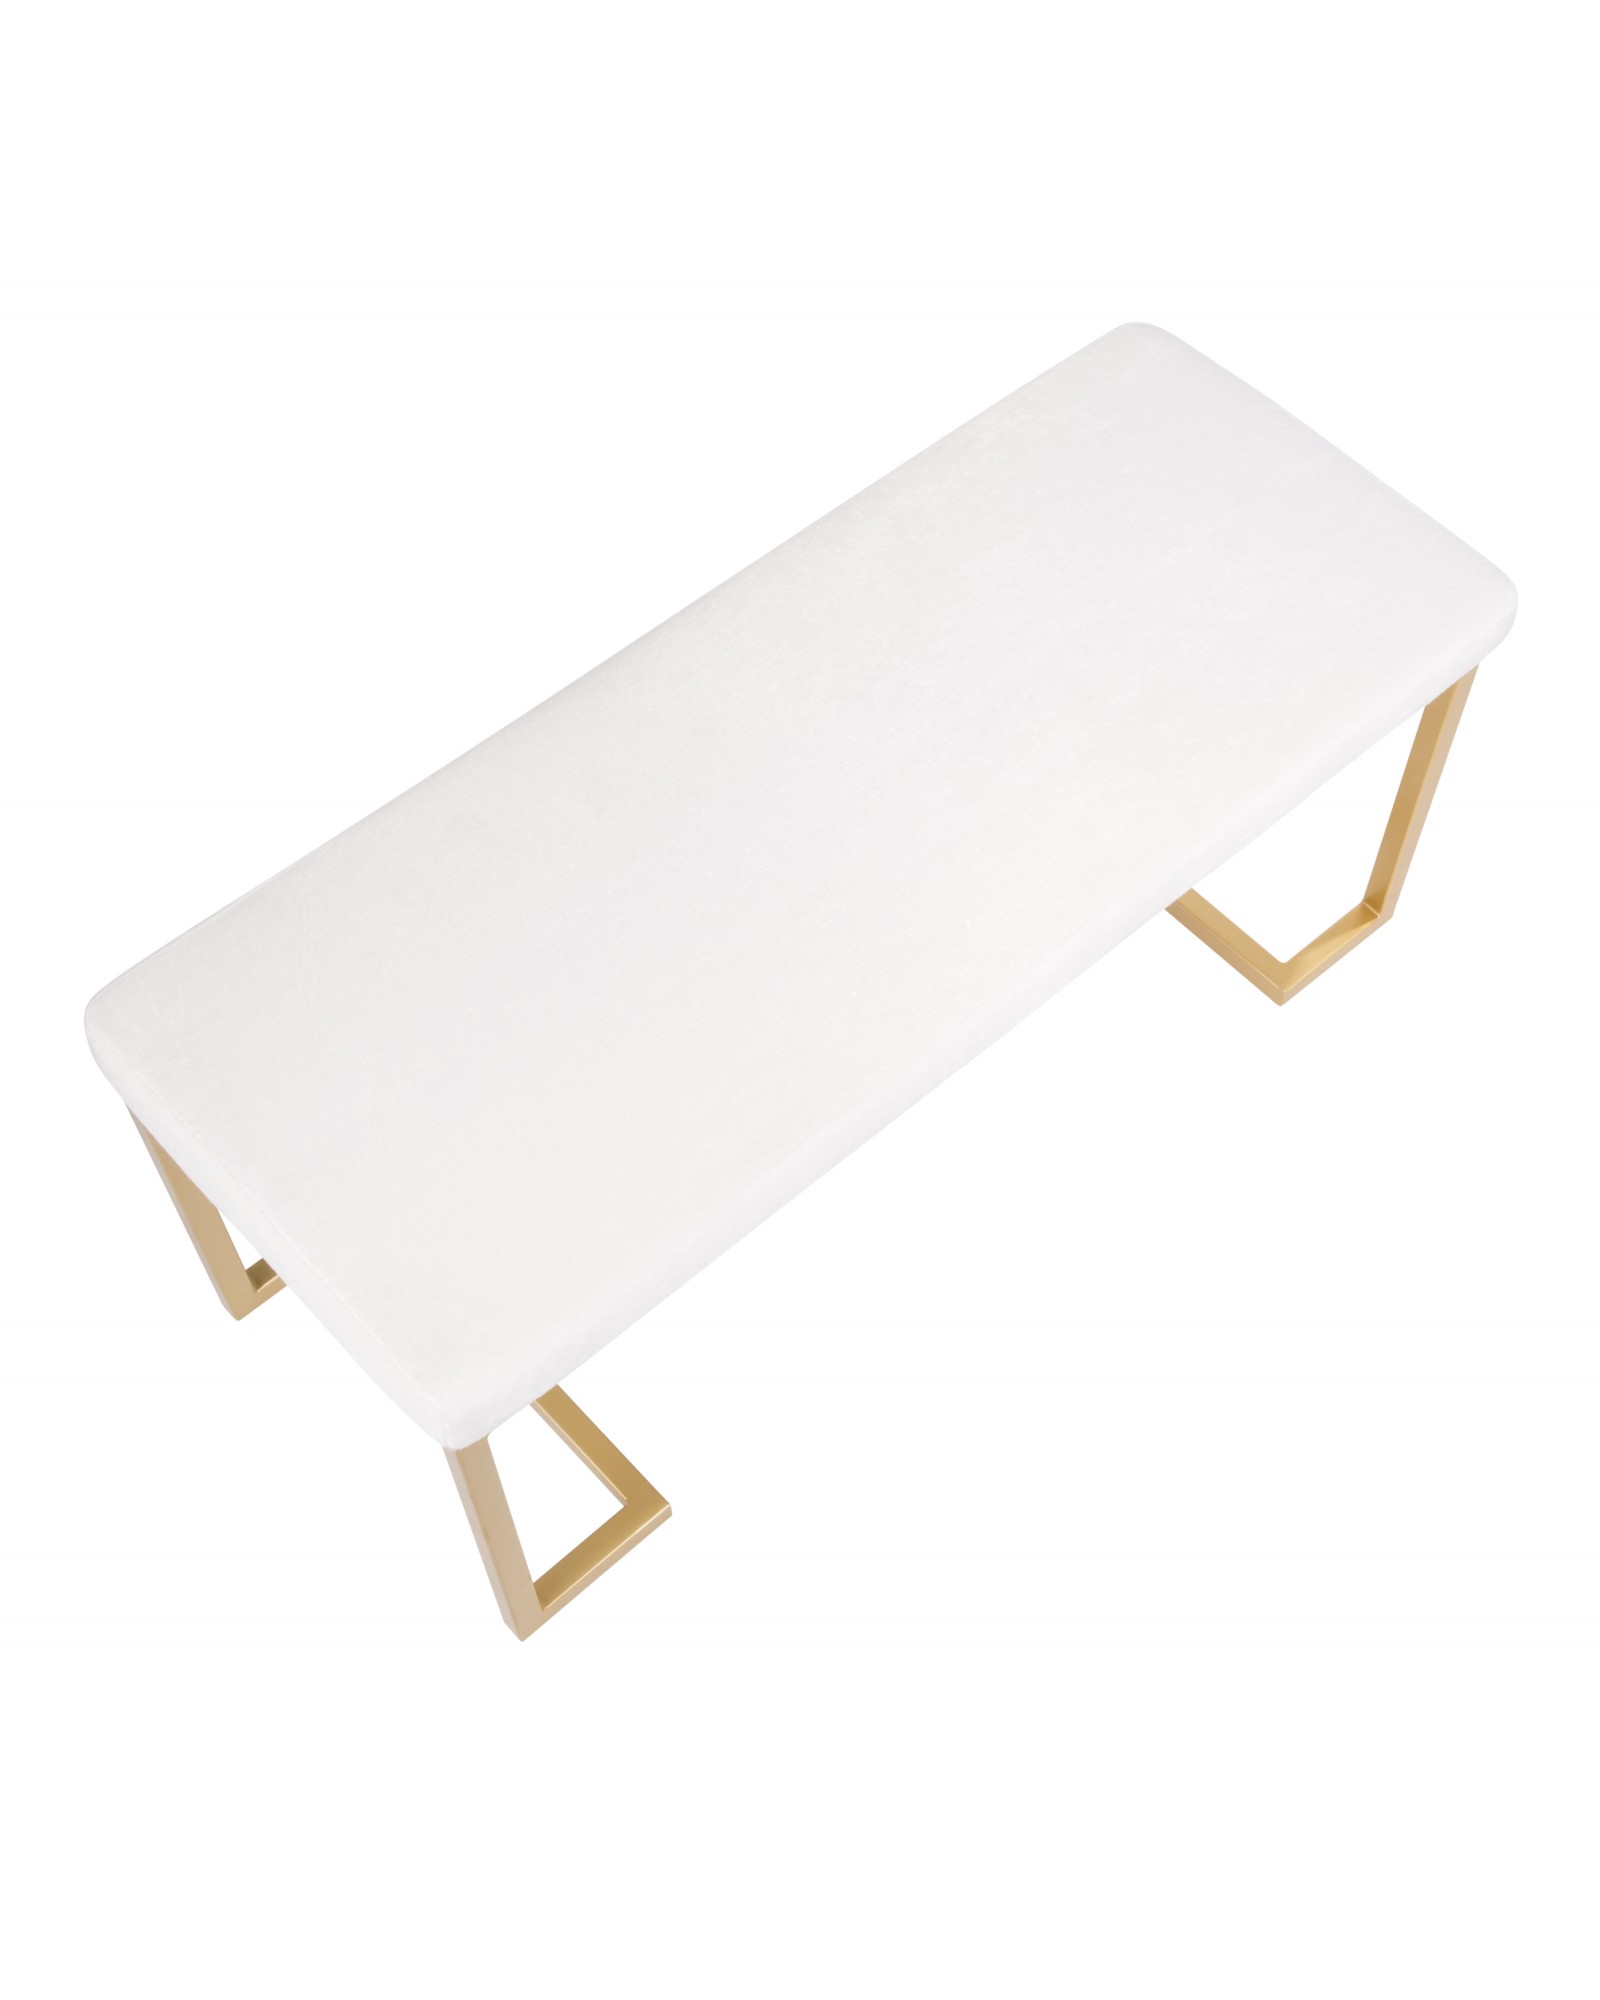 Midas Contemporary-Glam Entryway/Dining Bench in Gold with White Mohair Cushion